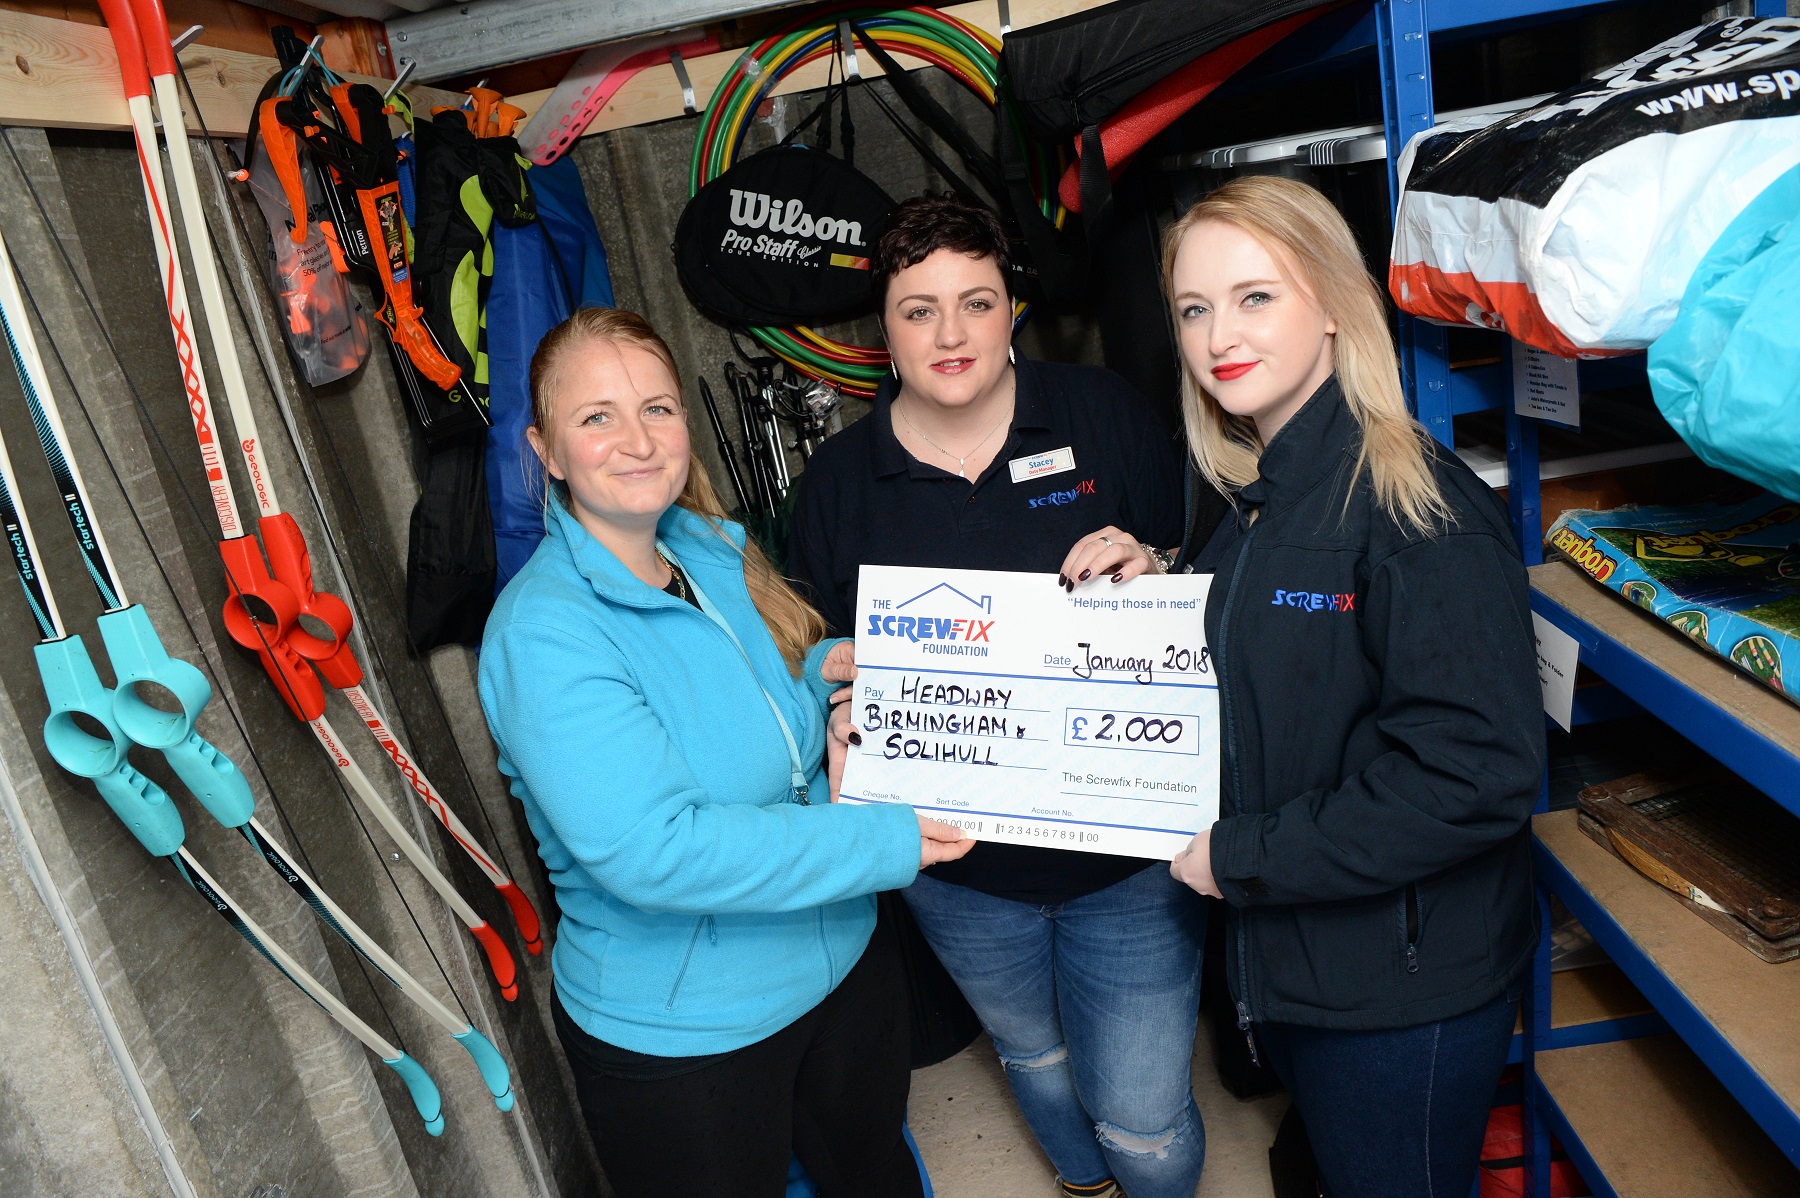 Headway Birmingham & Solihull receives generous donation from the Screwfix Foundation